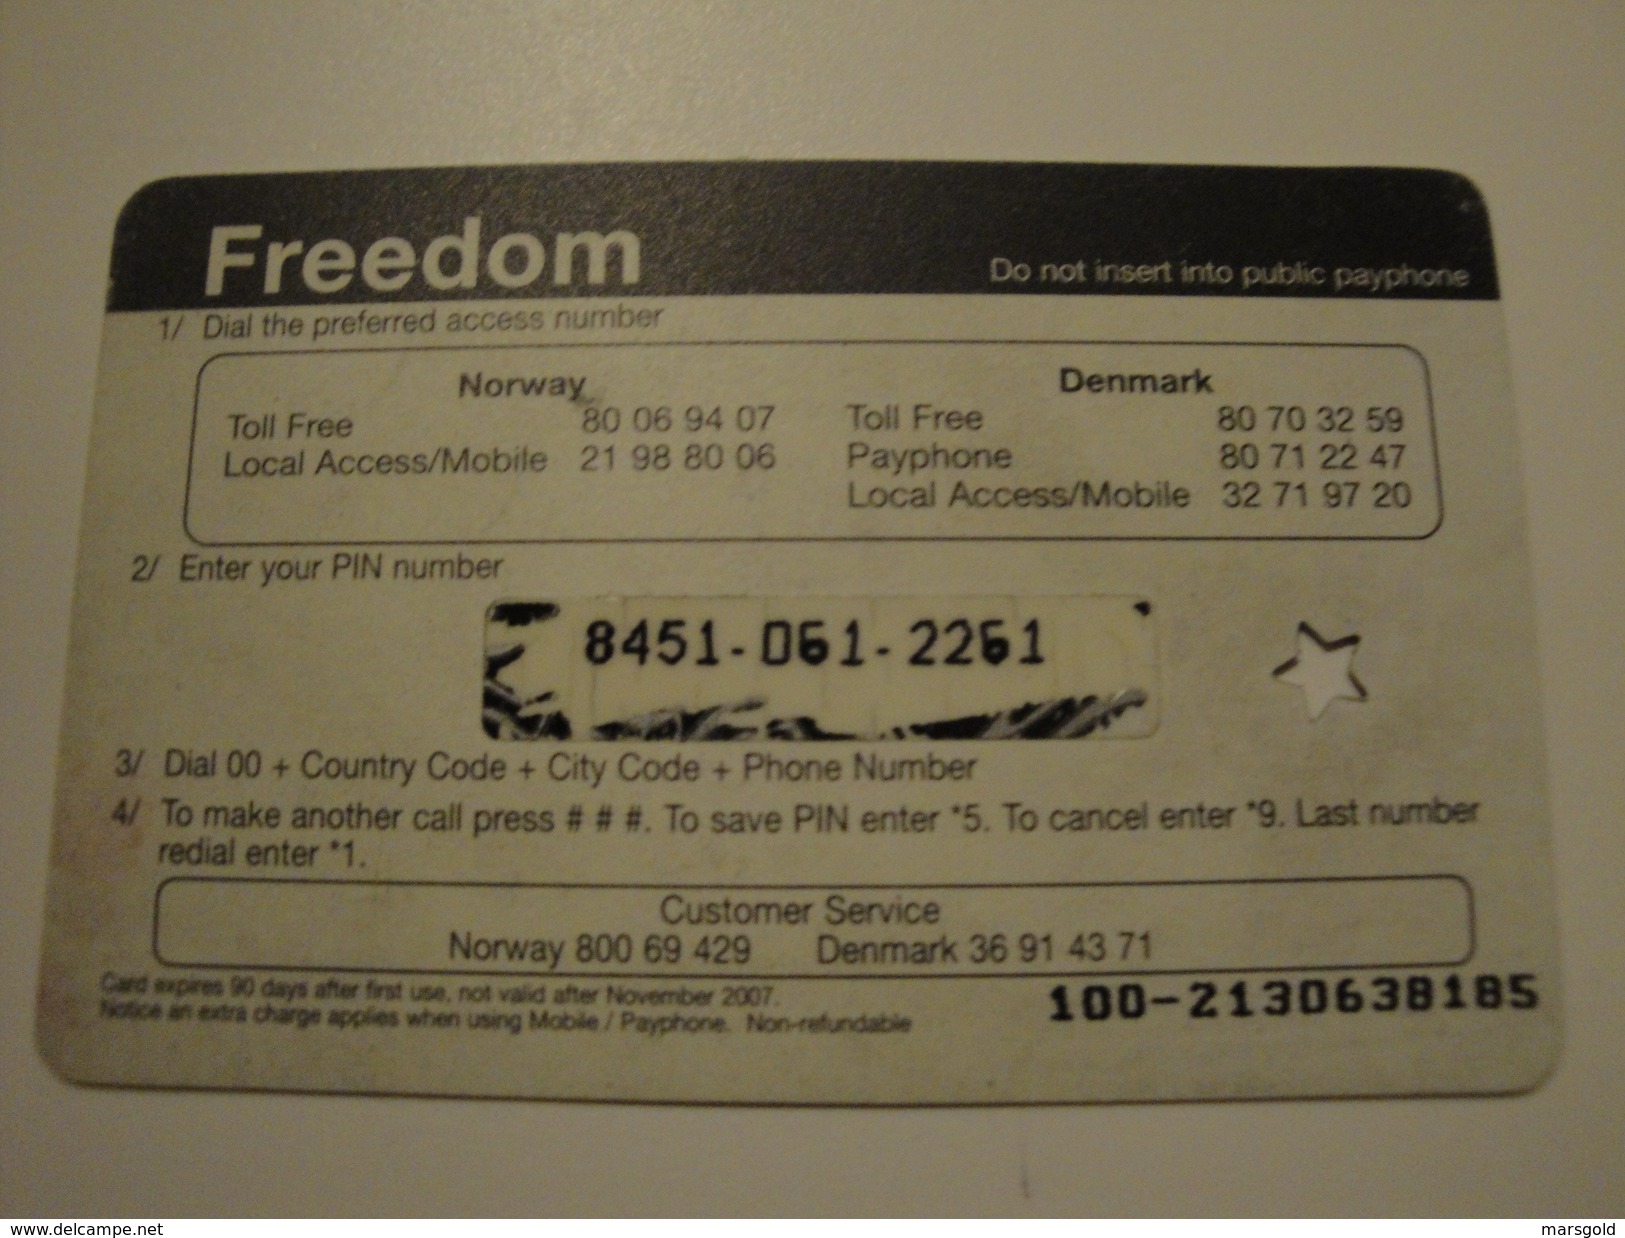 1 Remote Phonecard From Norway - Freedom - Swan - Norway